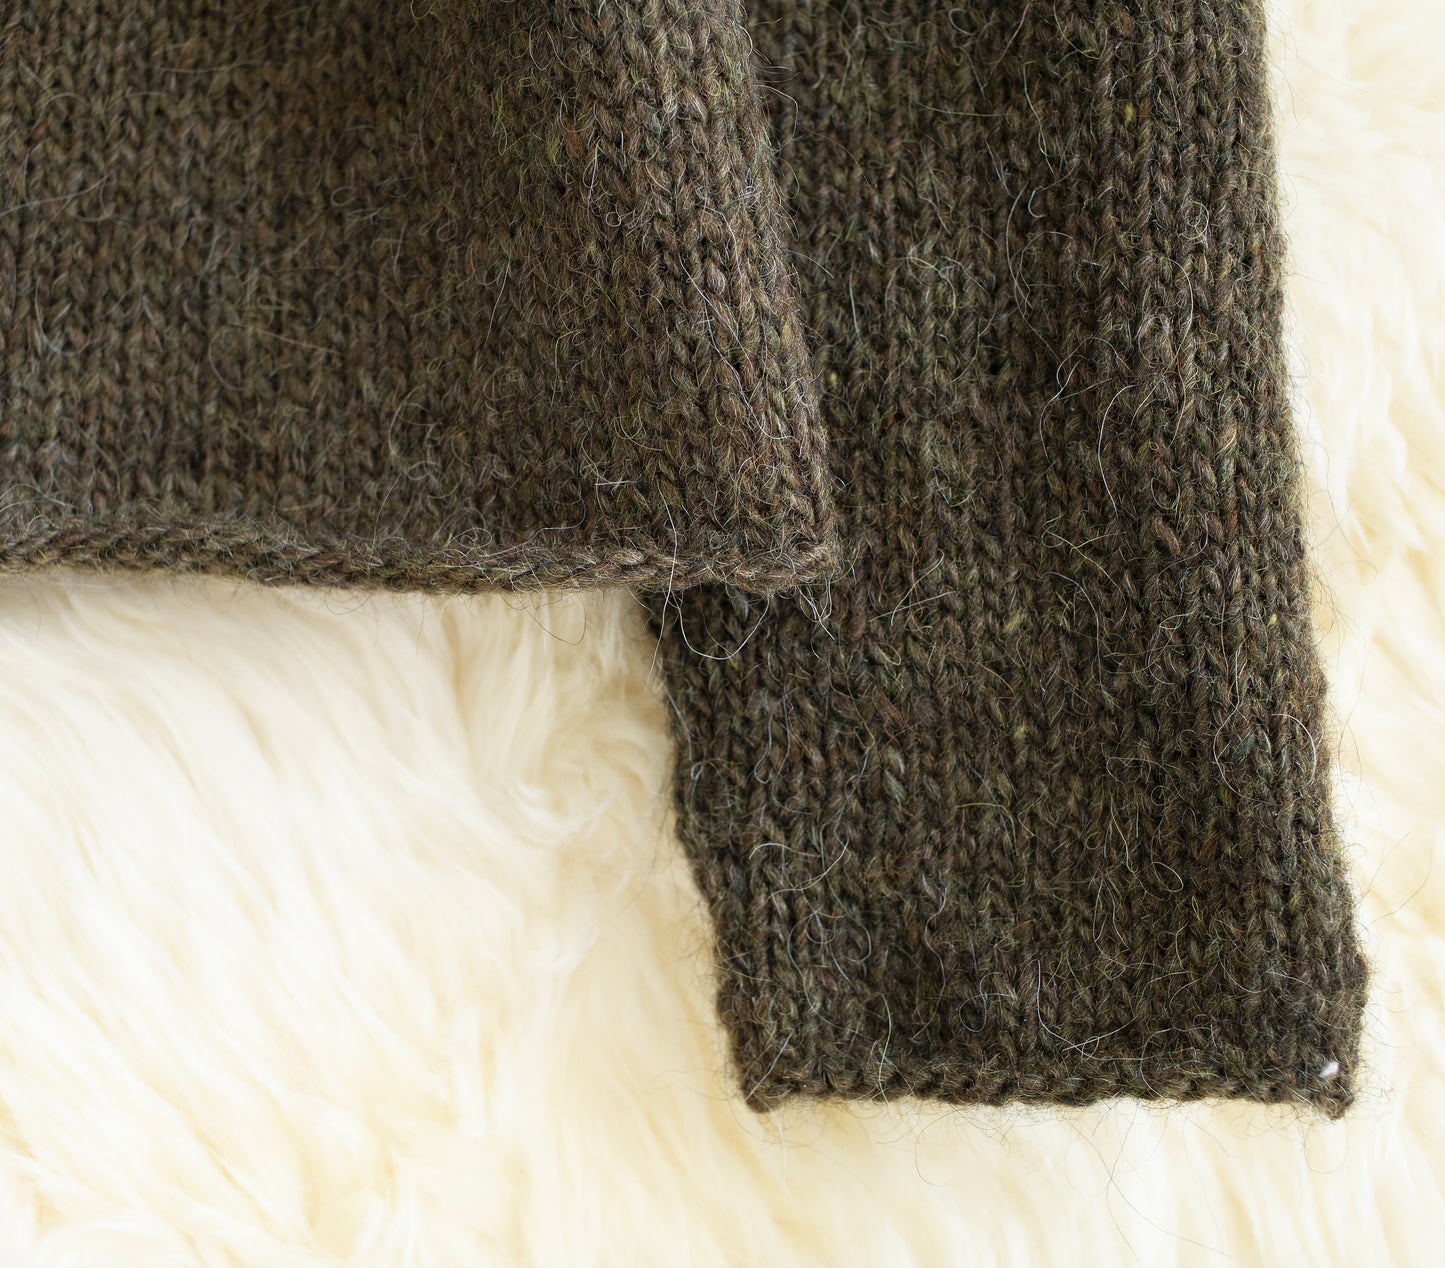 Details of Brown and beige Icelandic lopapeysa knitted sweater from Lettlopi pure Icelandic wool